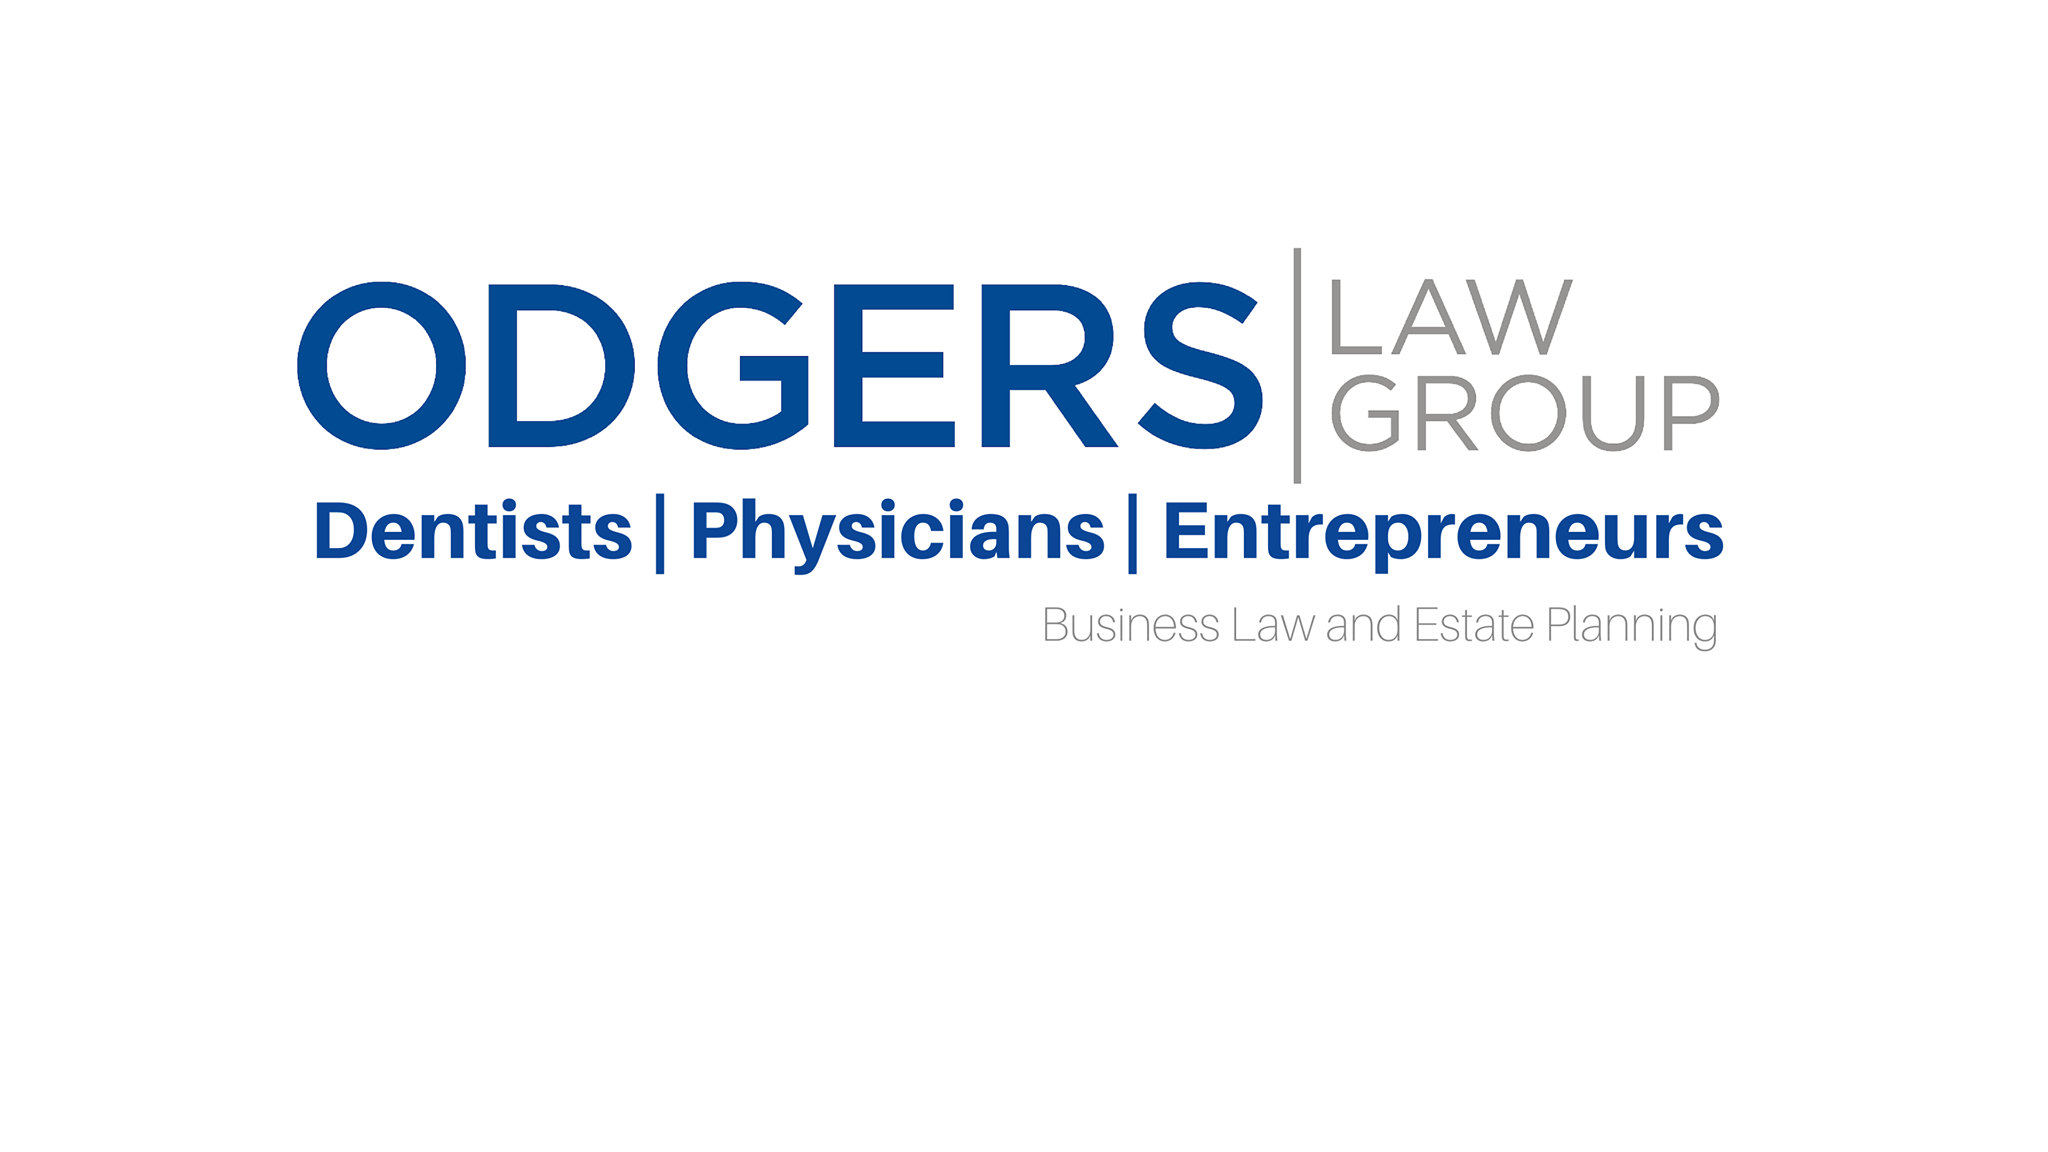 Company logo of Odgers Law Group